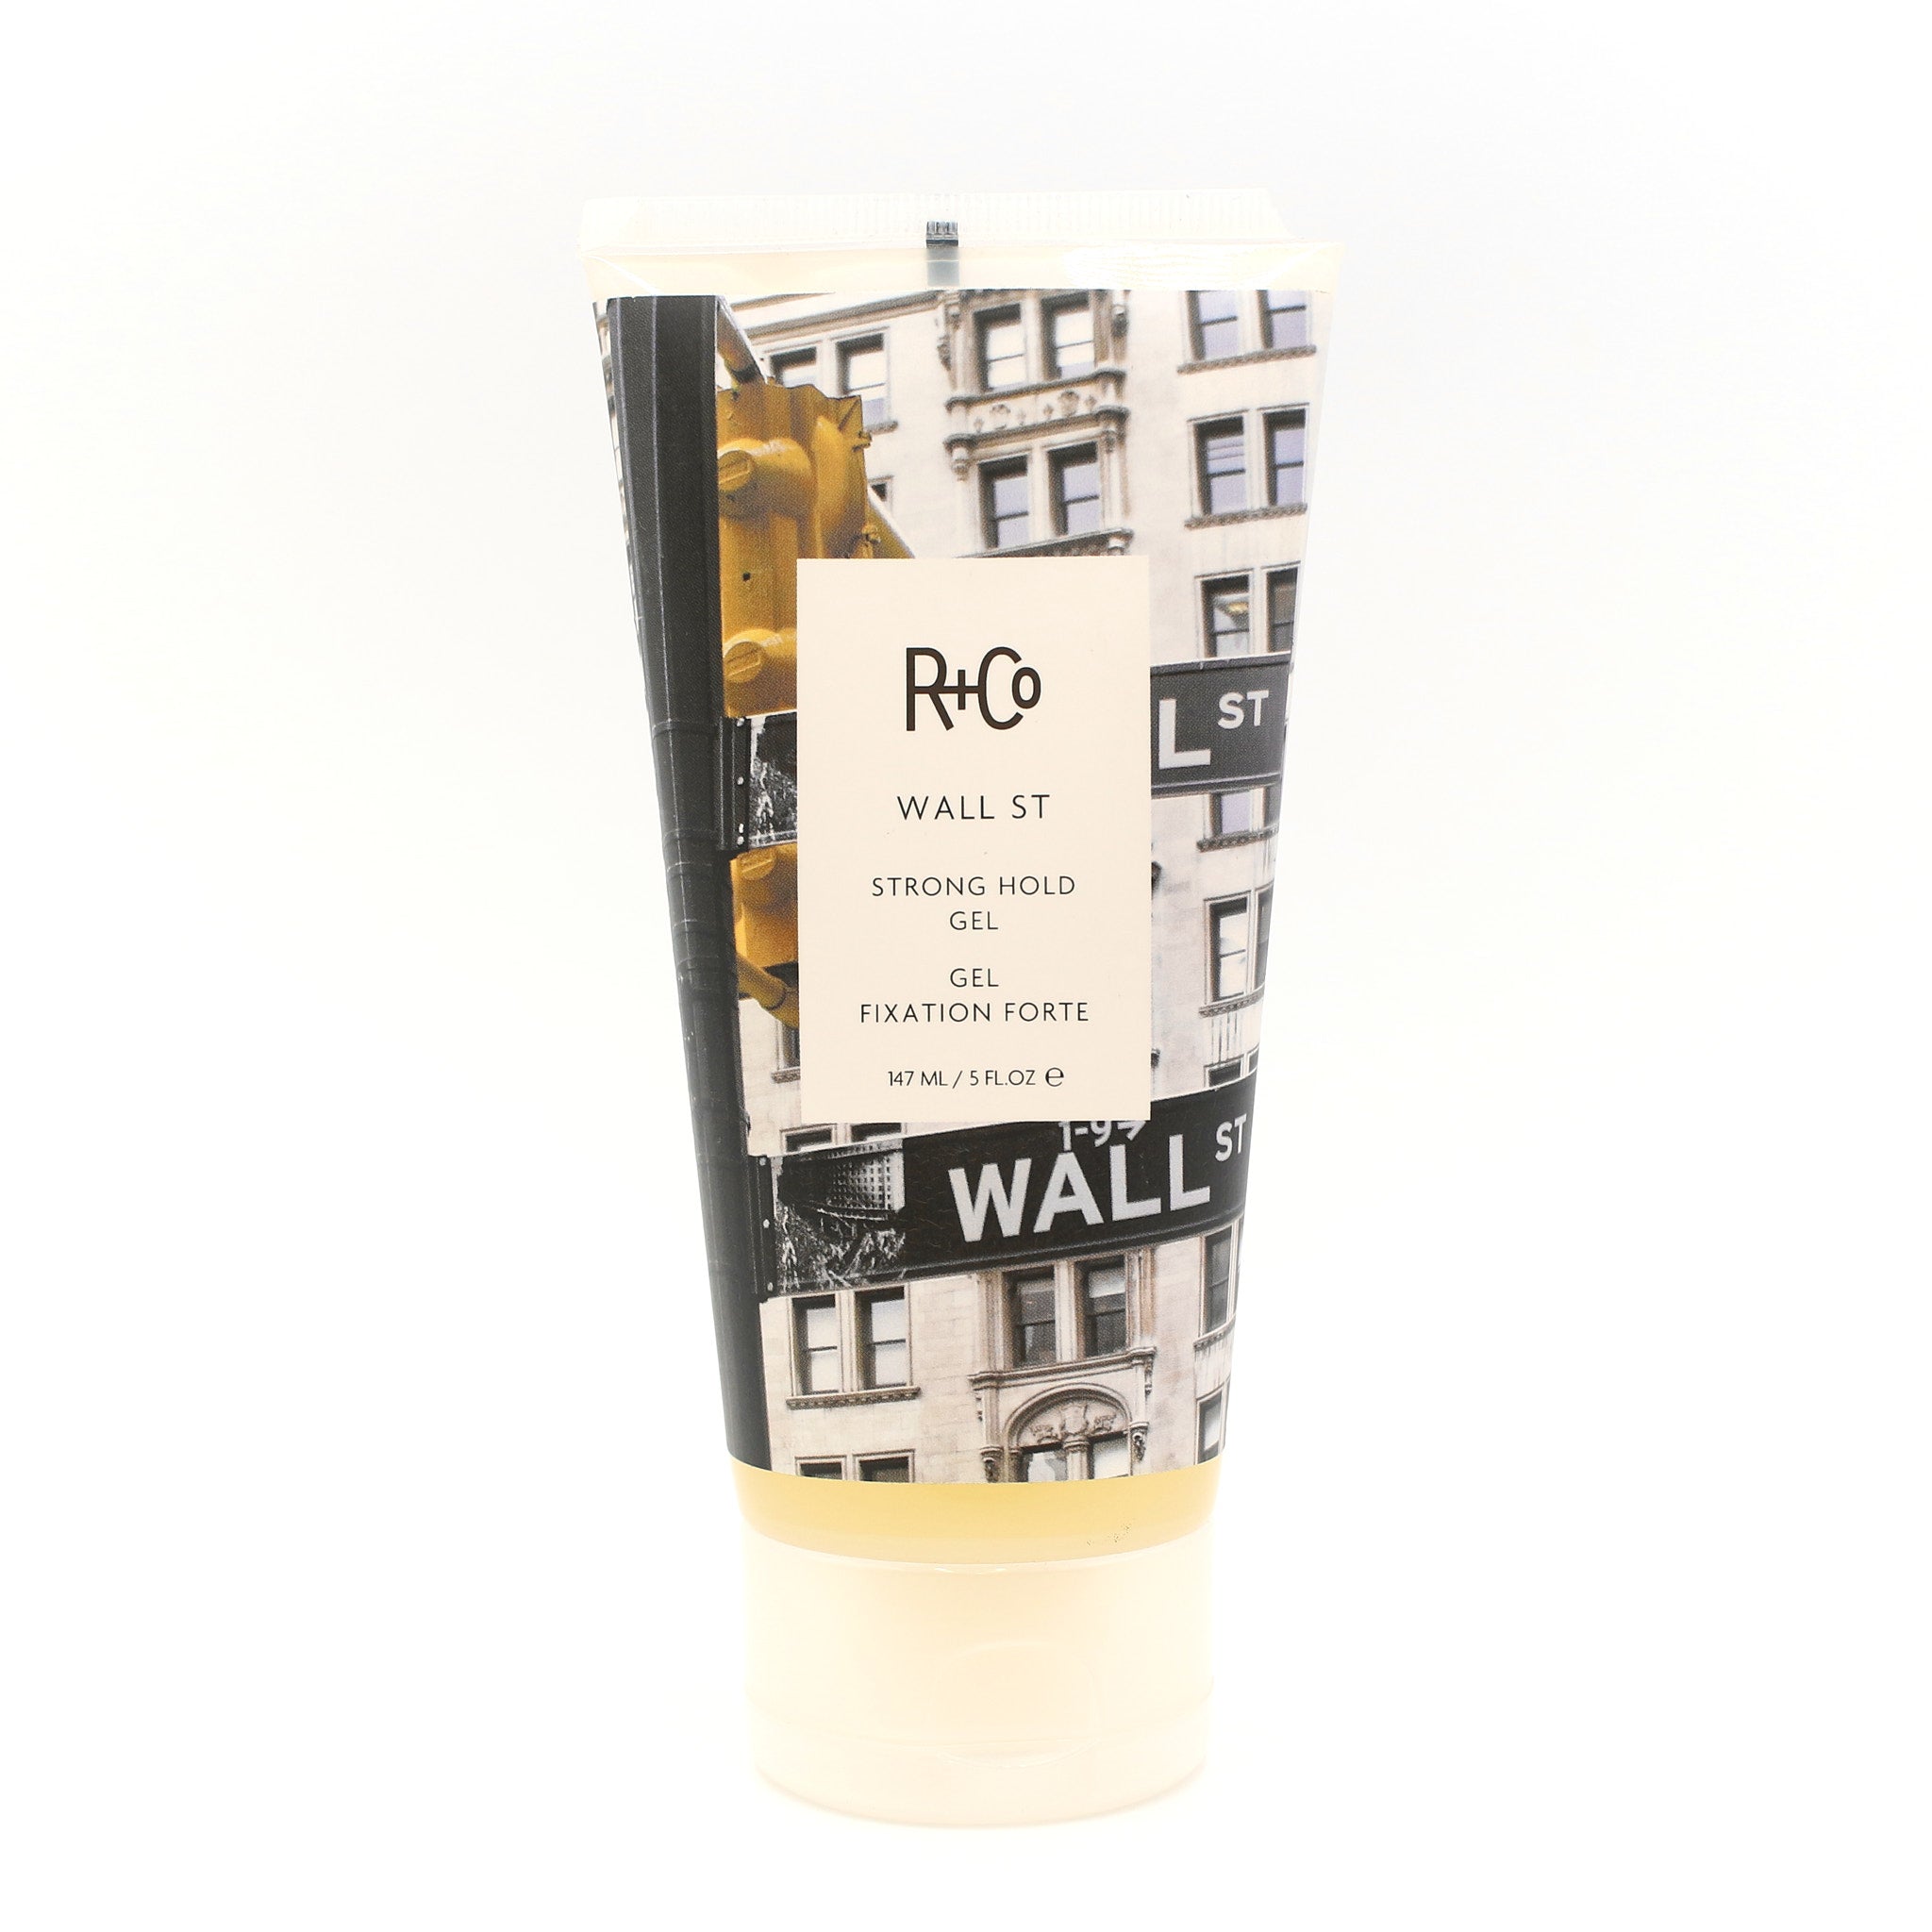 R+Co Wall St Strong Hold Gel 5 oz